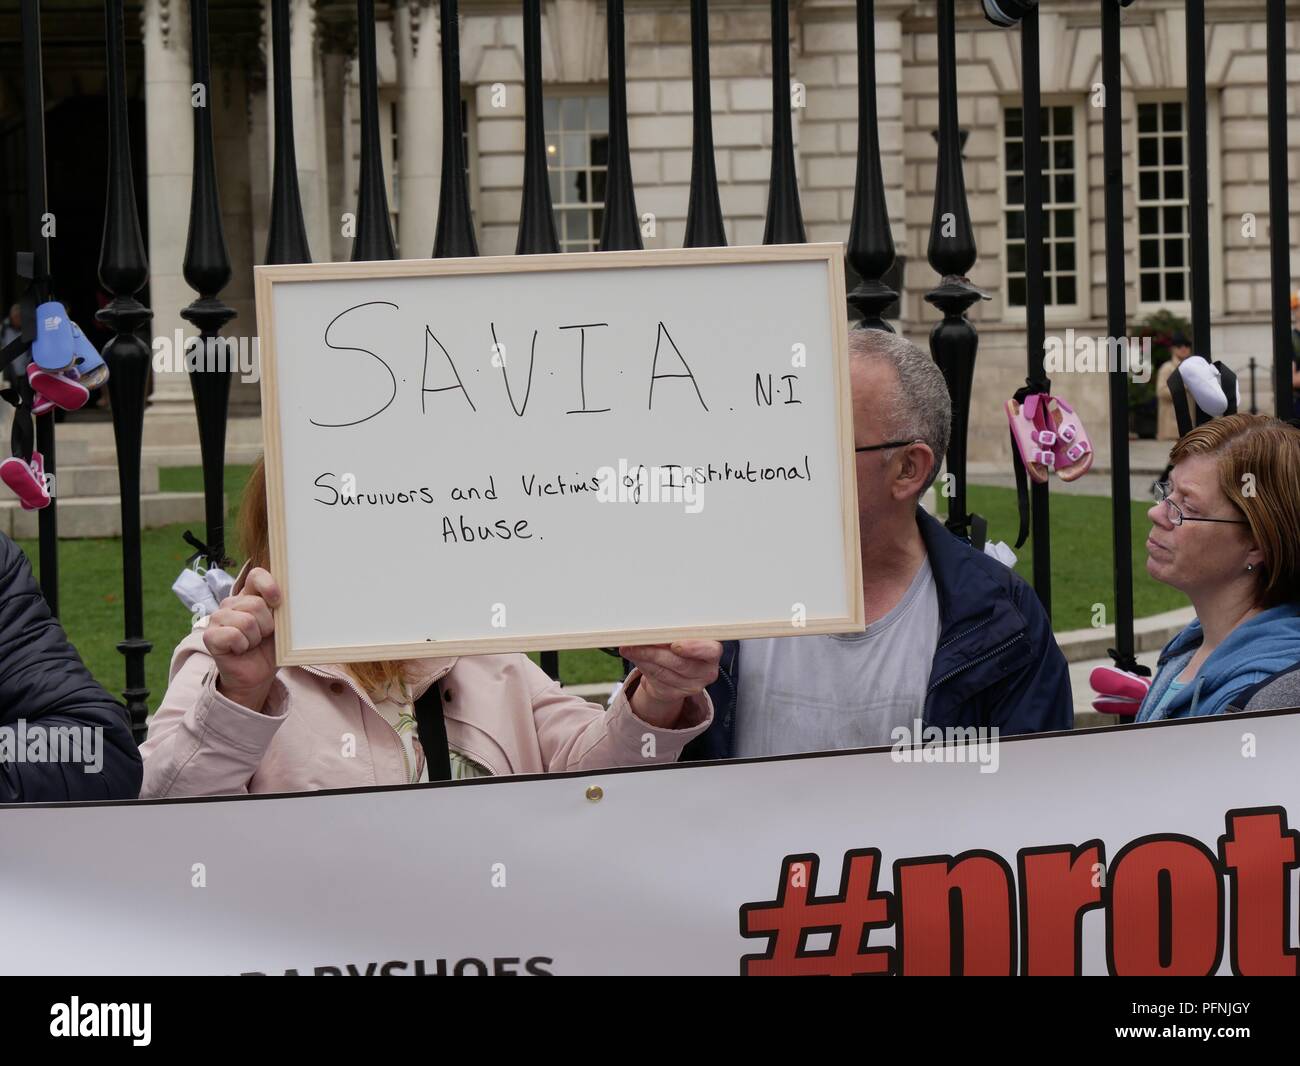 Belfast, Northern Ireland, UK. 22 August 2018. Survivors and Victims of Clerical and Institutional Abuse (SAVIA) held a protest at Belfast City Hall calling for an apology from the Vatican for historical child abuse. The group was joined by other victims and survivors. Pope Francis will visit Ireland over 25th and 26th August but will not visit Northern Ireland. Credit J Orr/Alamy Live News Stock Photo